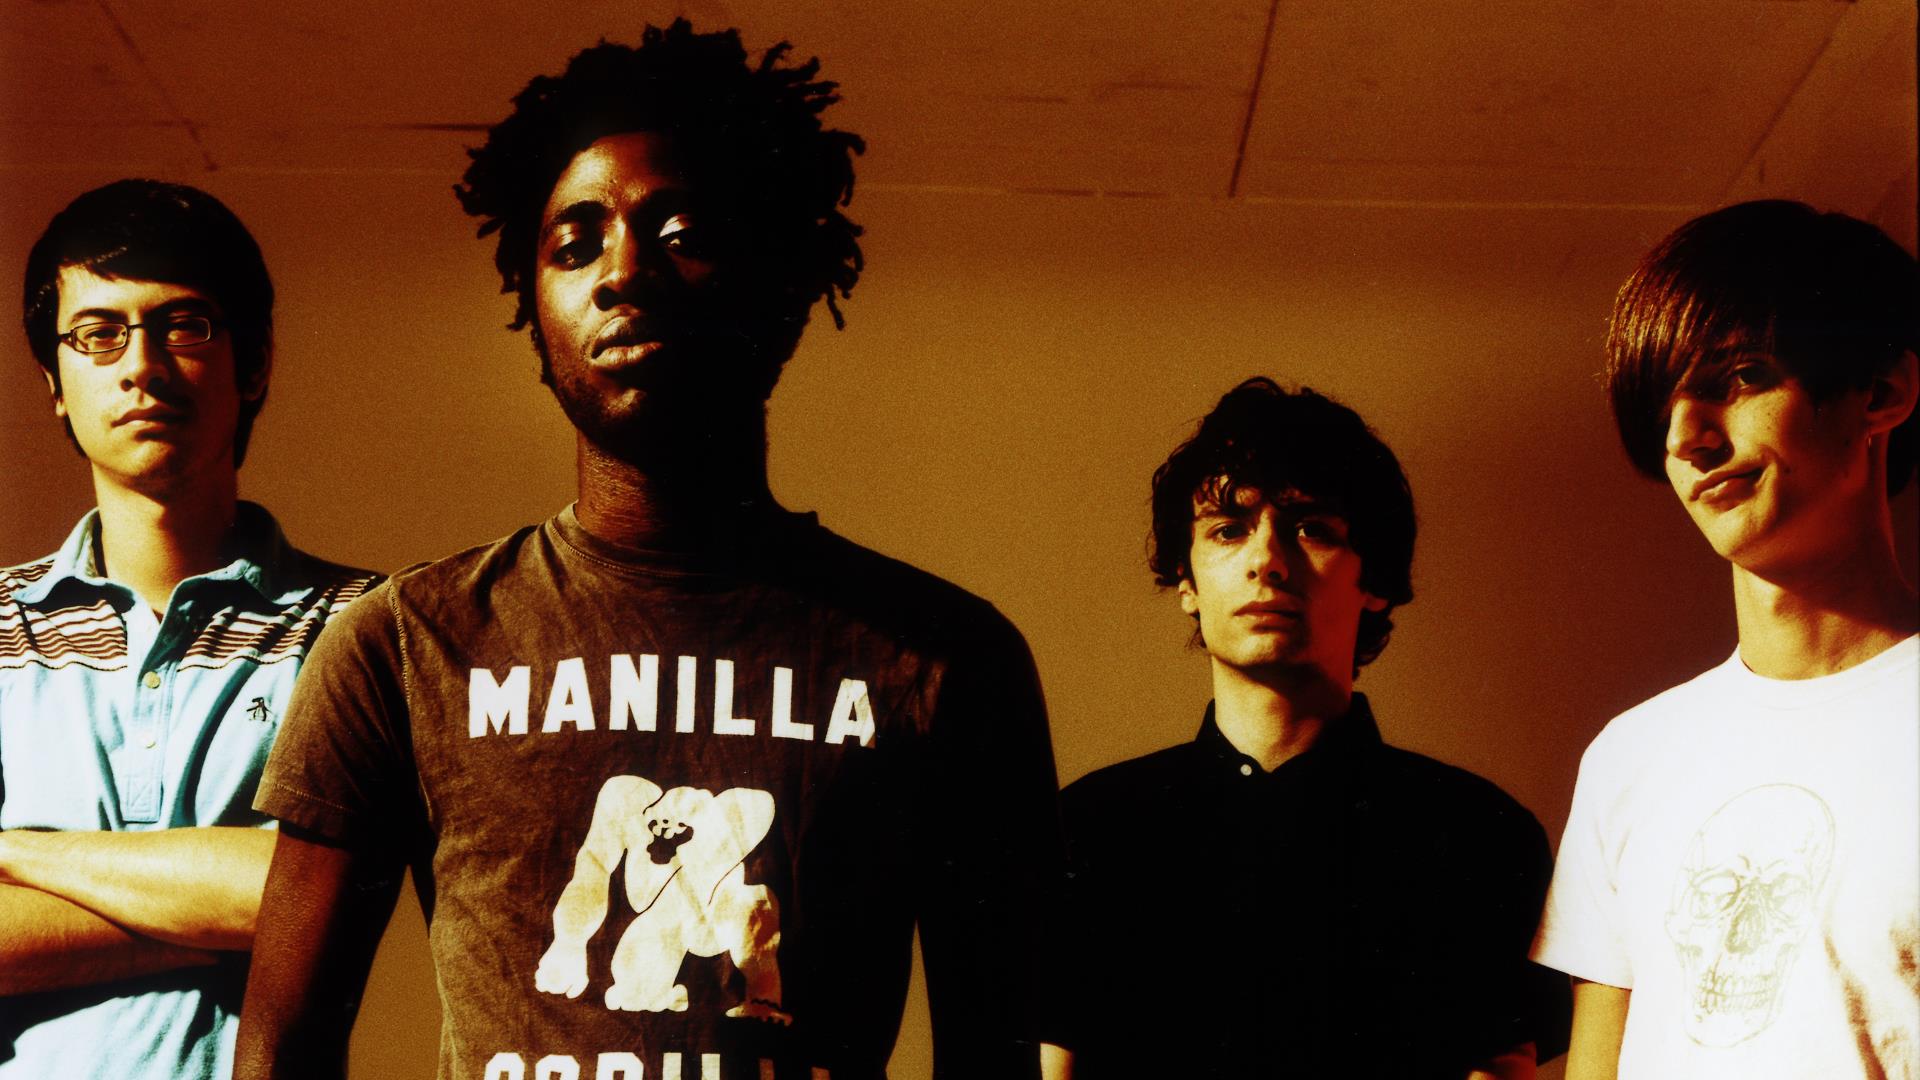 bloc party another weekend in the city download